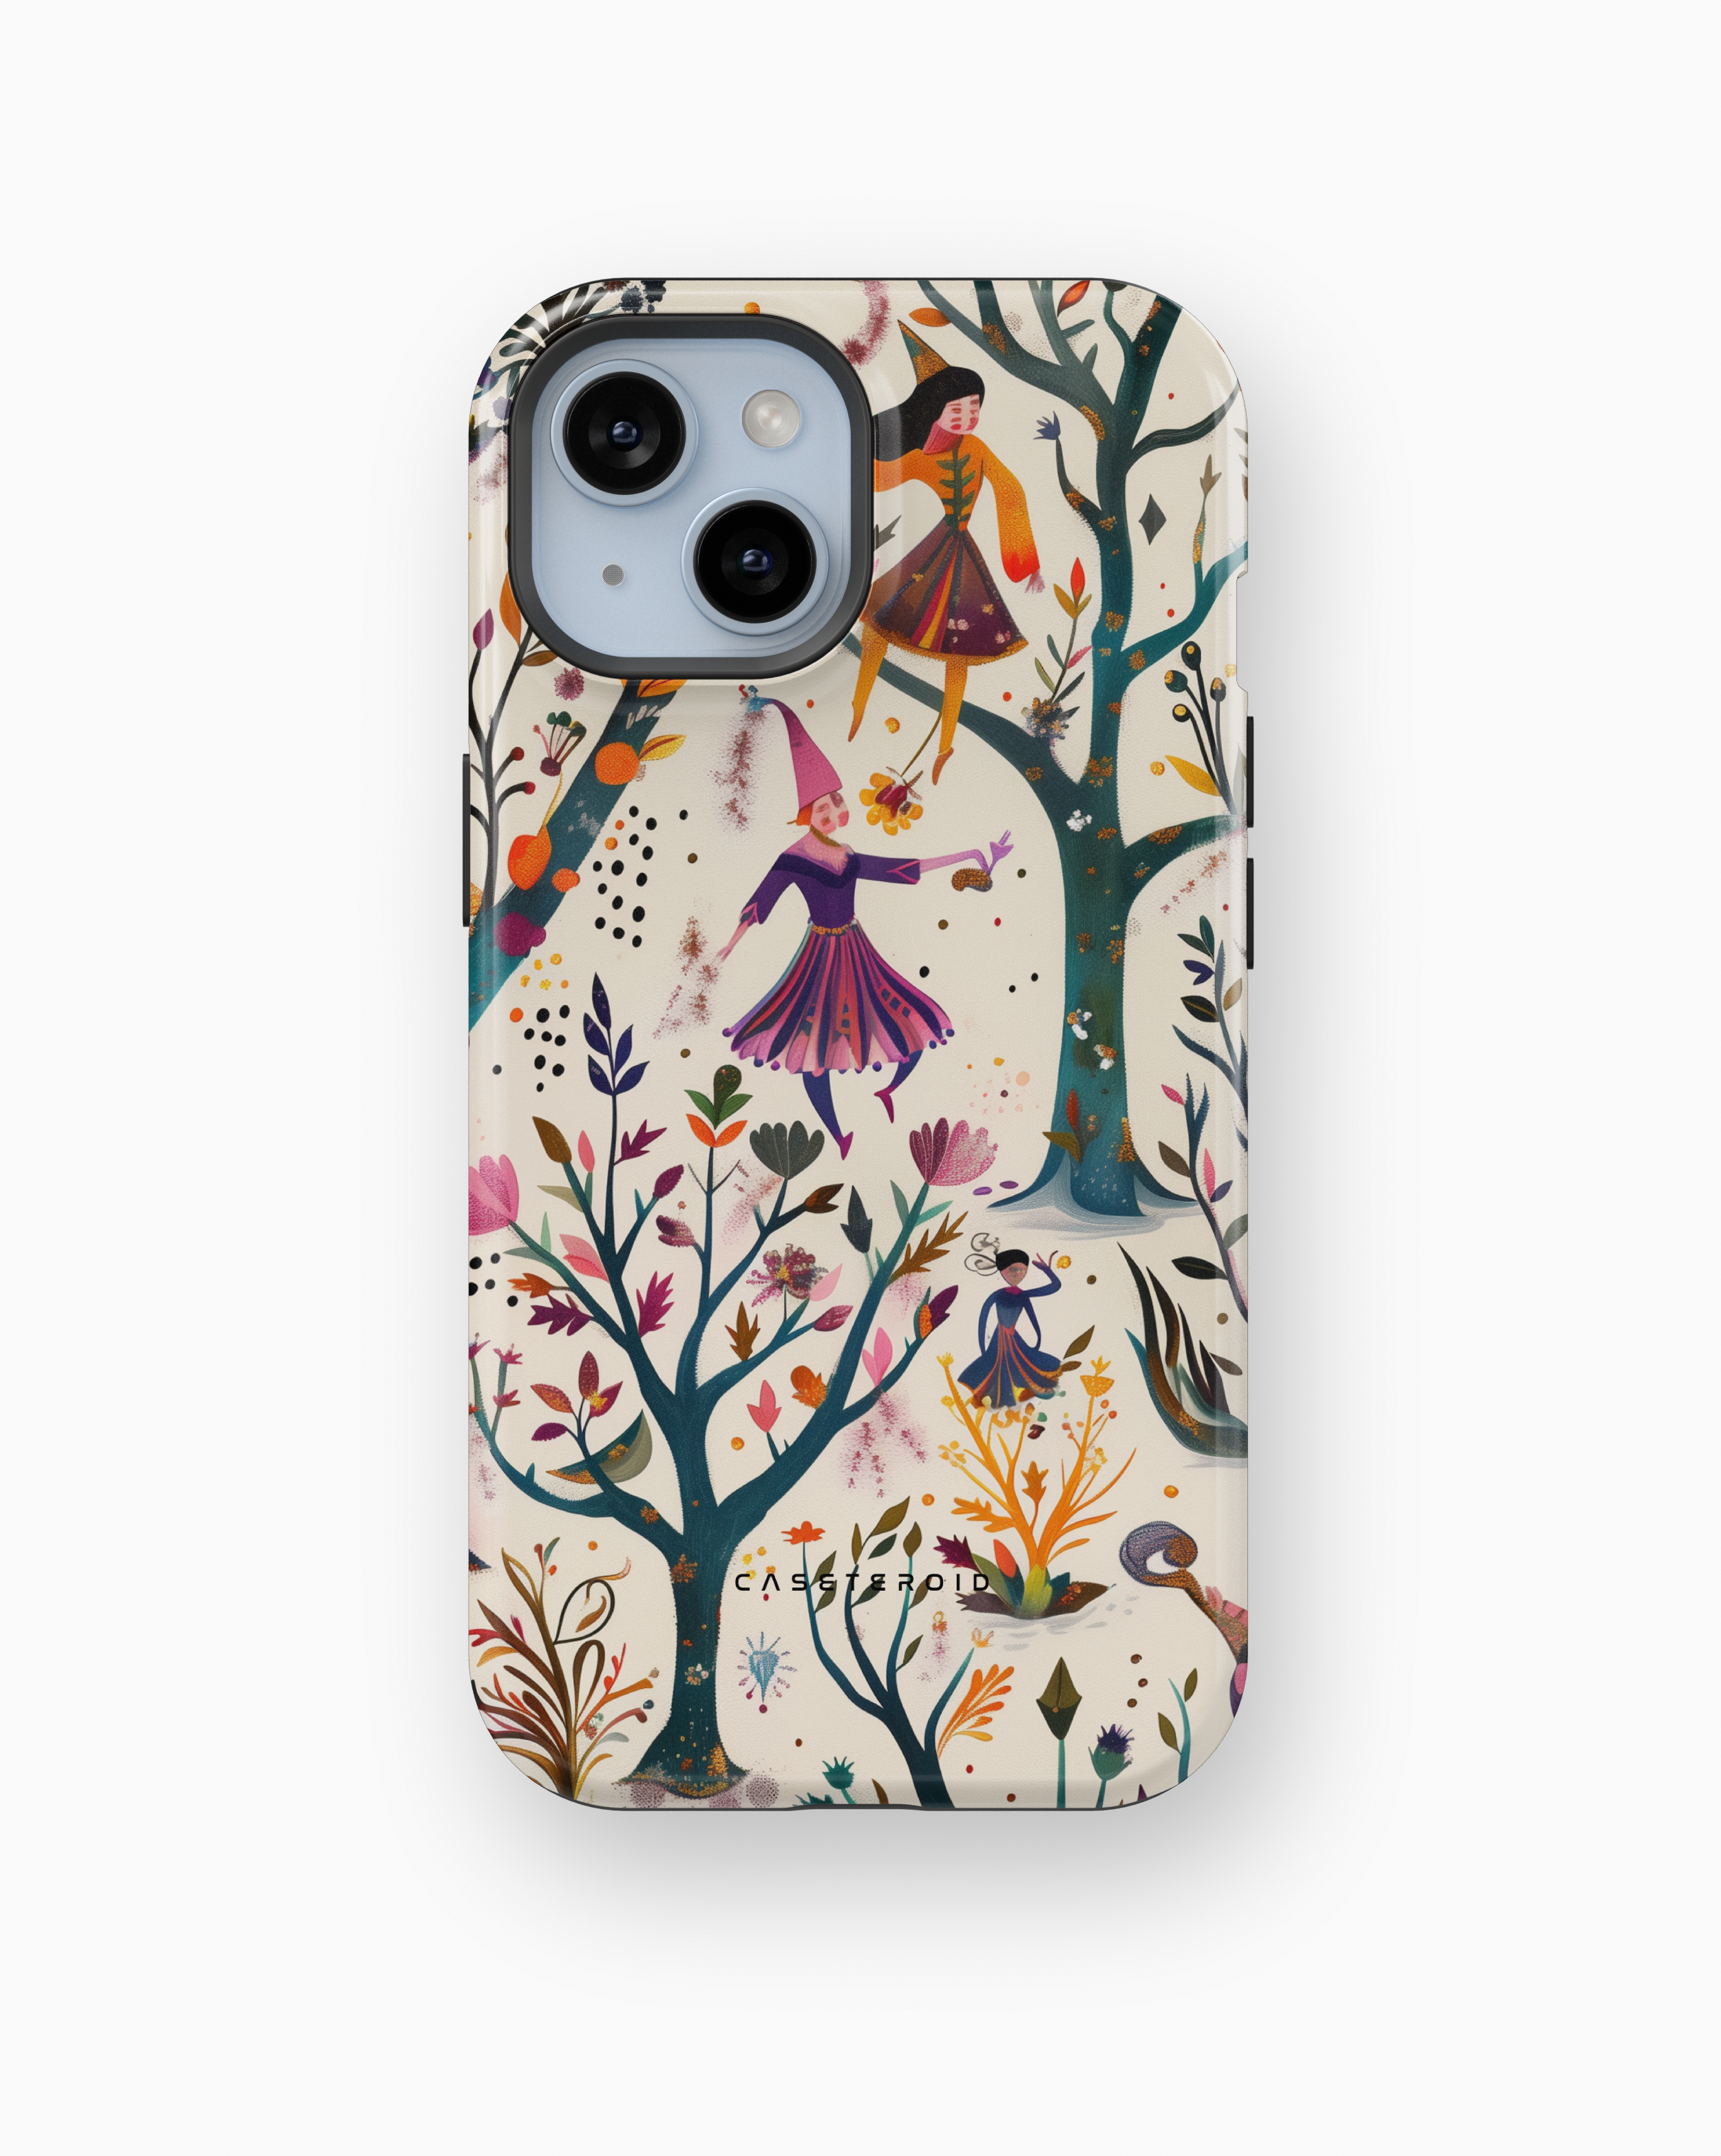 iPhone Tough Case - Gleaming Pixie Grove - CASETEROID